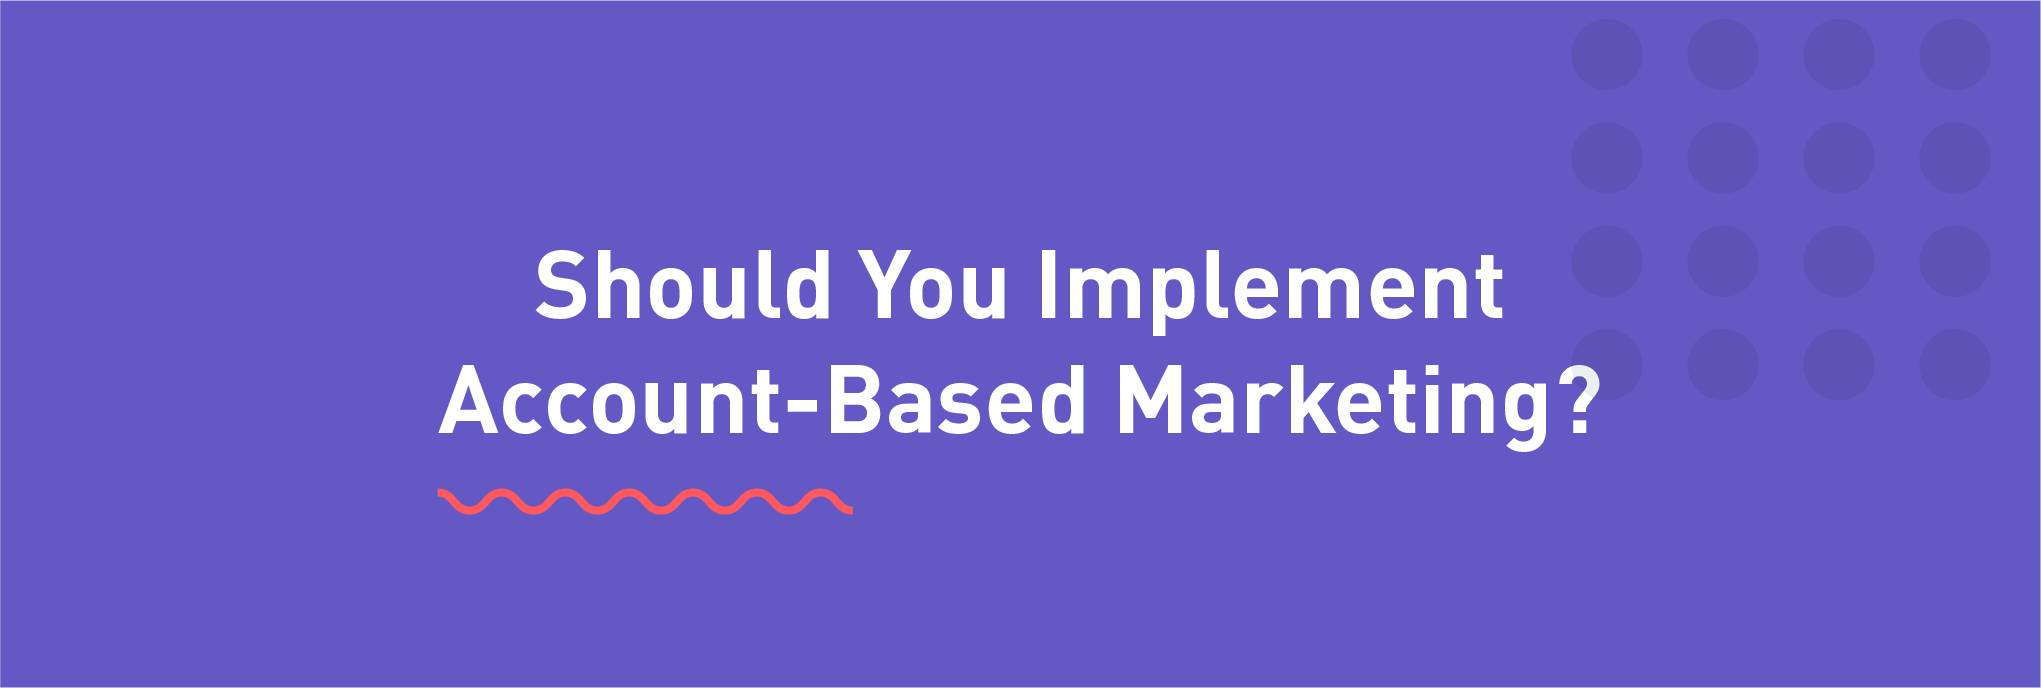 Should You Implement Account-Based Marketing?